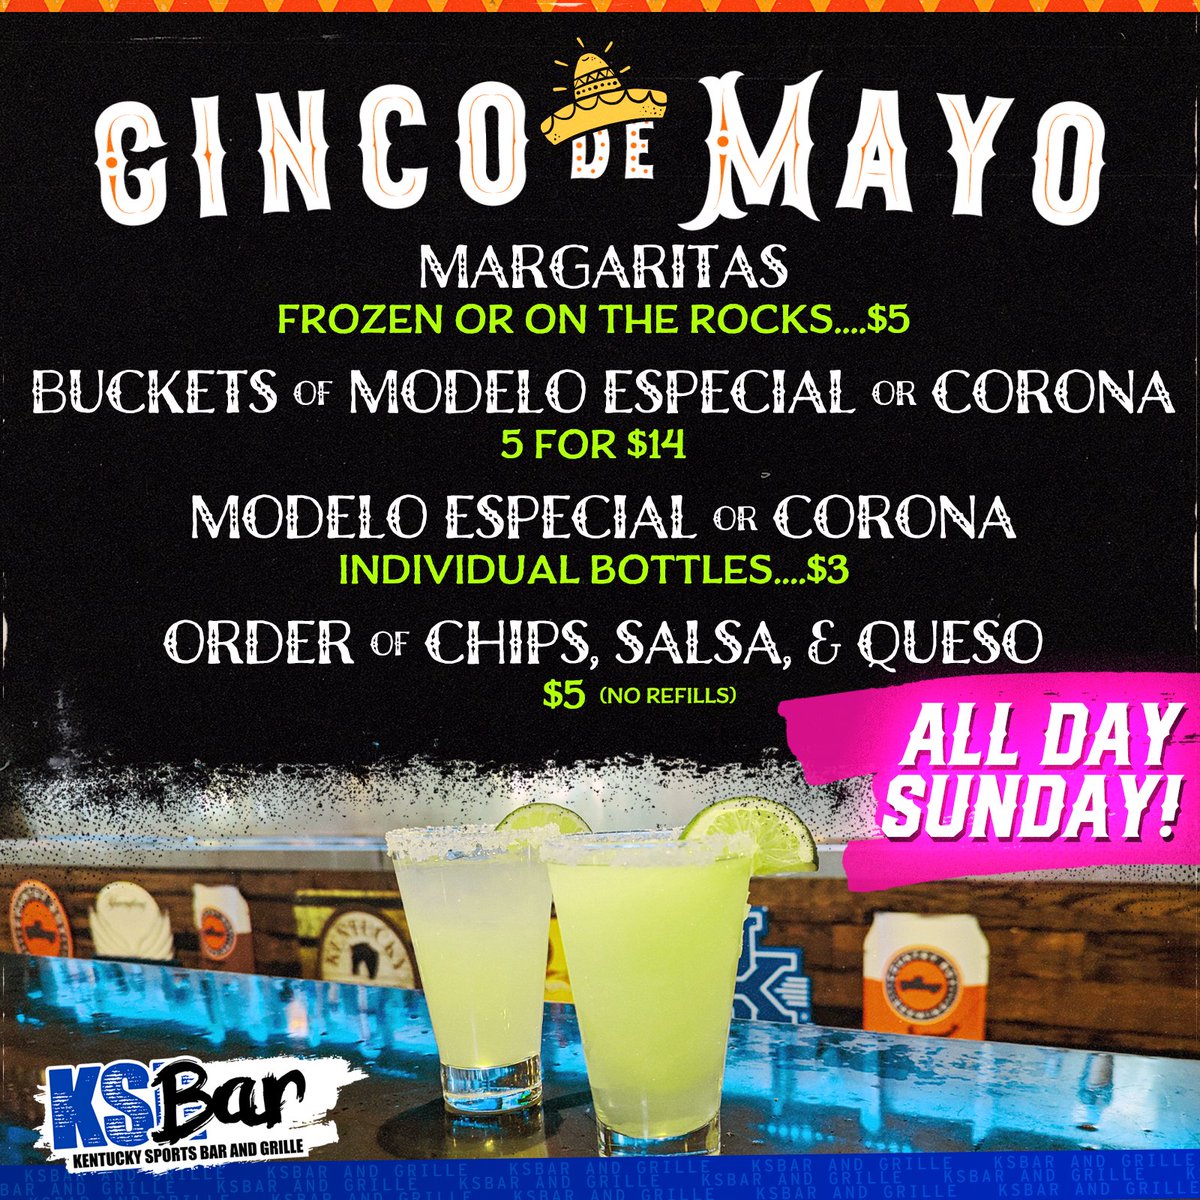 Sunday, Sunday, Sunday! Cinco de Mayo specials all day. $5 Mark-aritas and our NEW chips, salsa and queso.